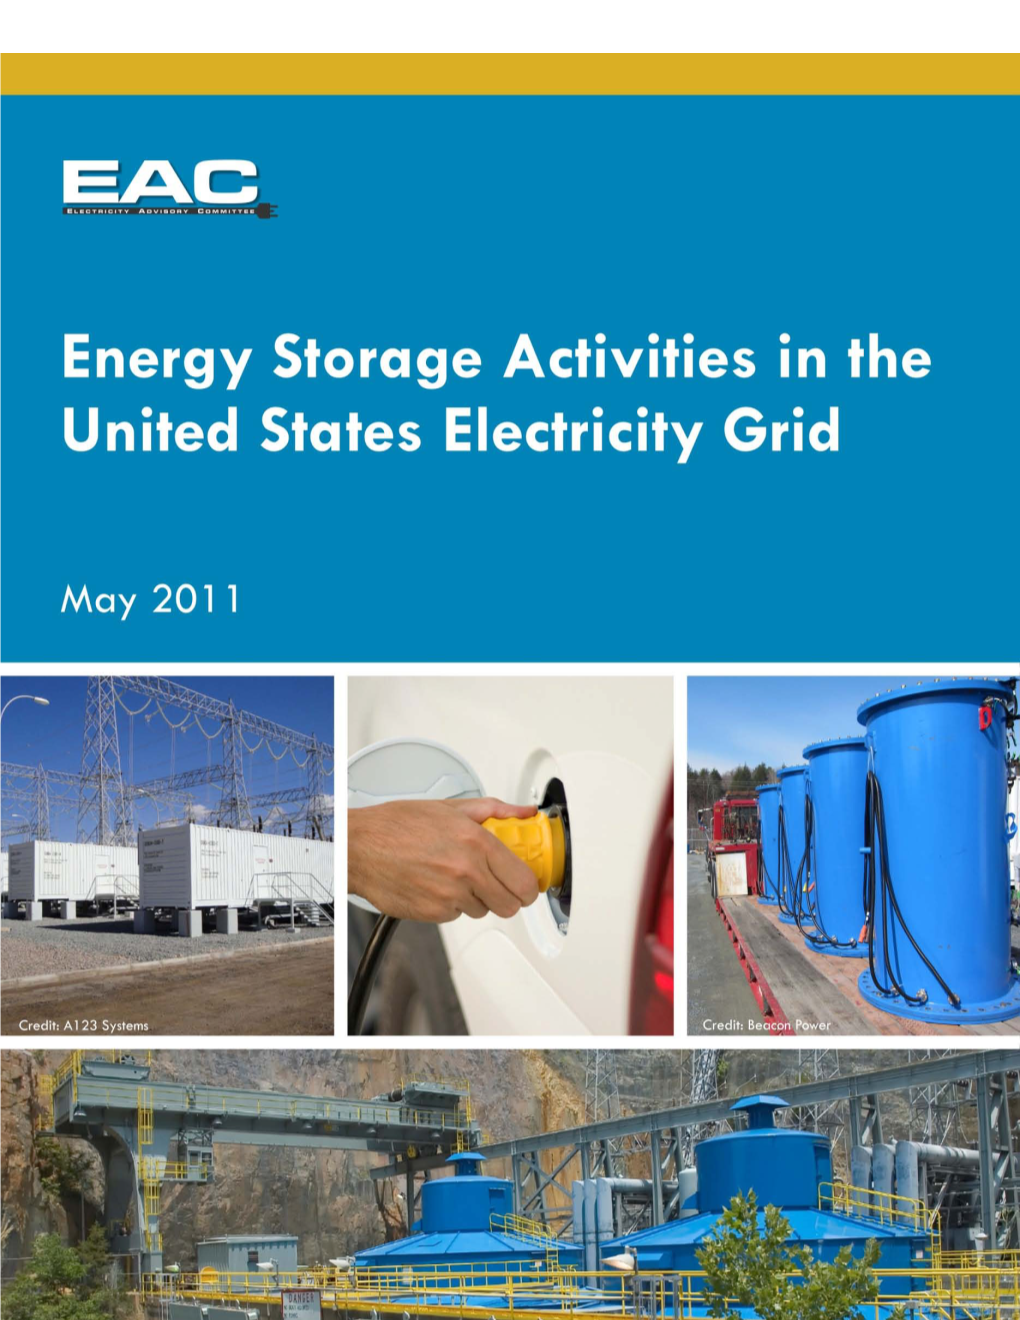 Energy Storage Activities in the United States Electricity Grid. May 2011